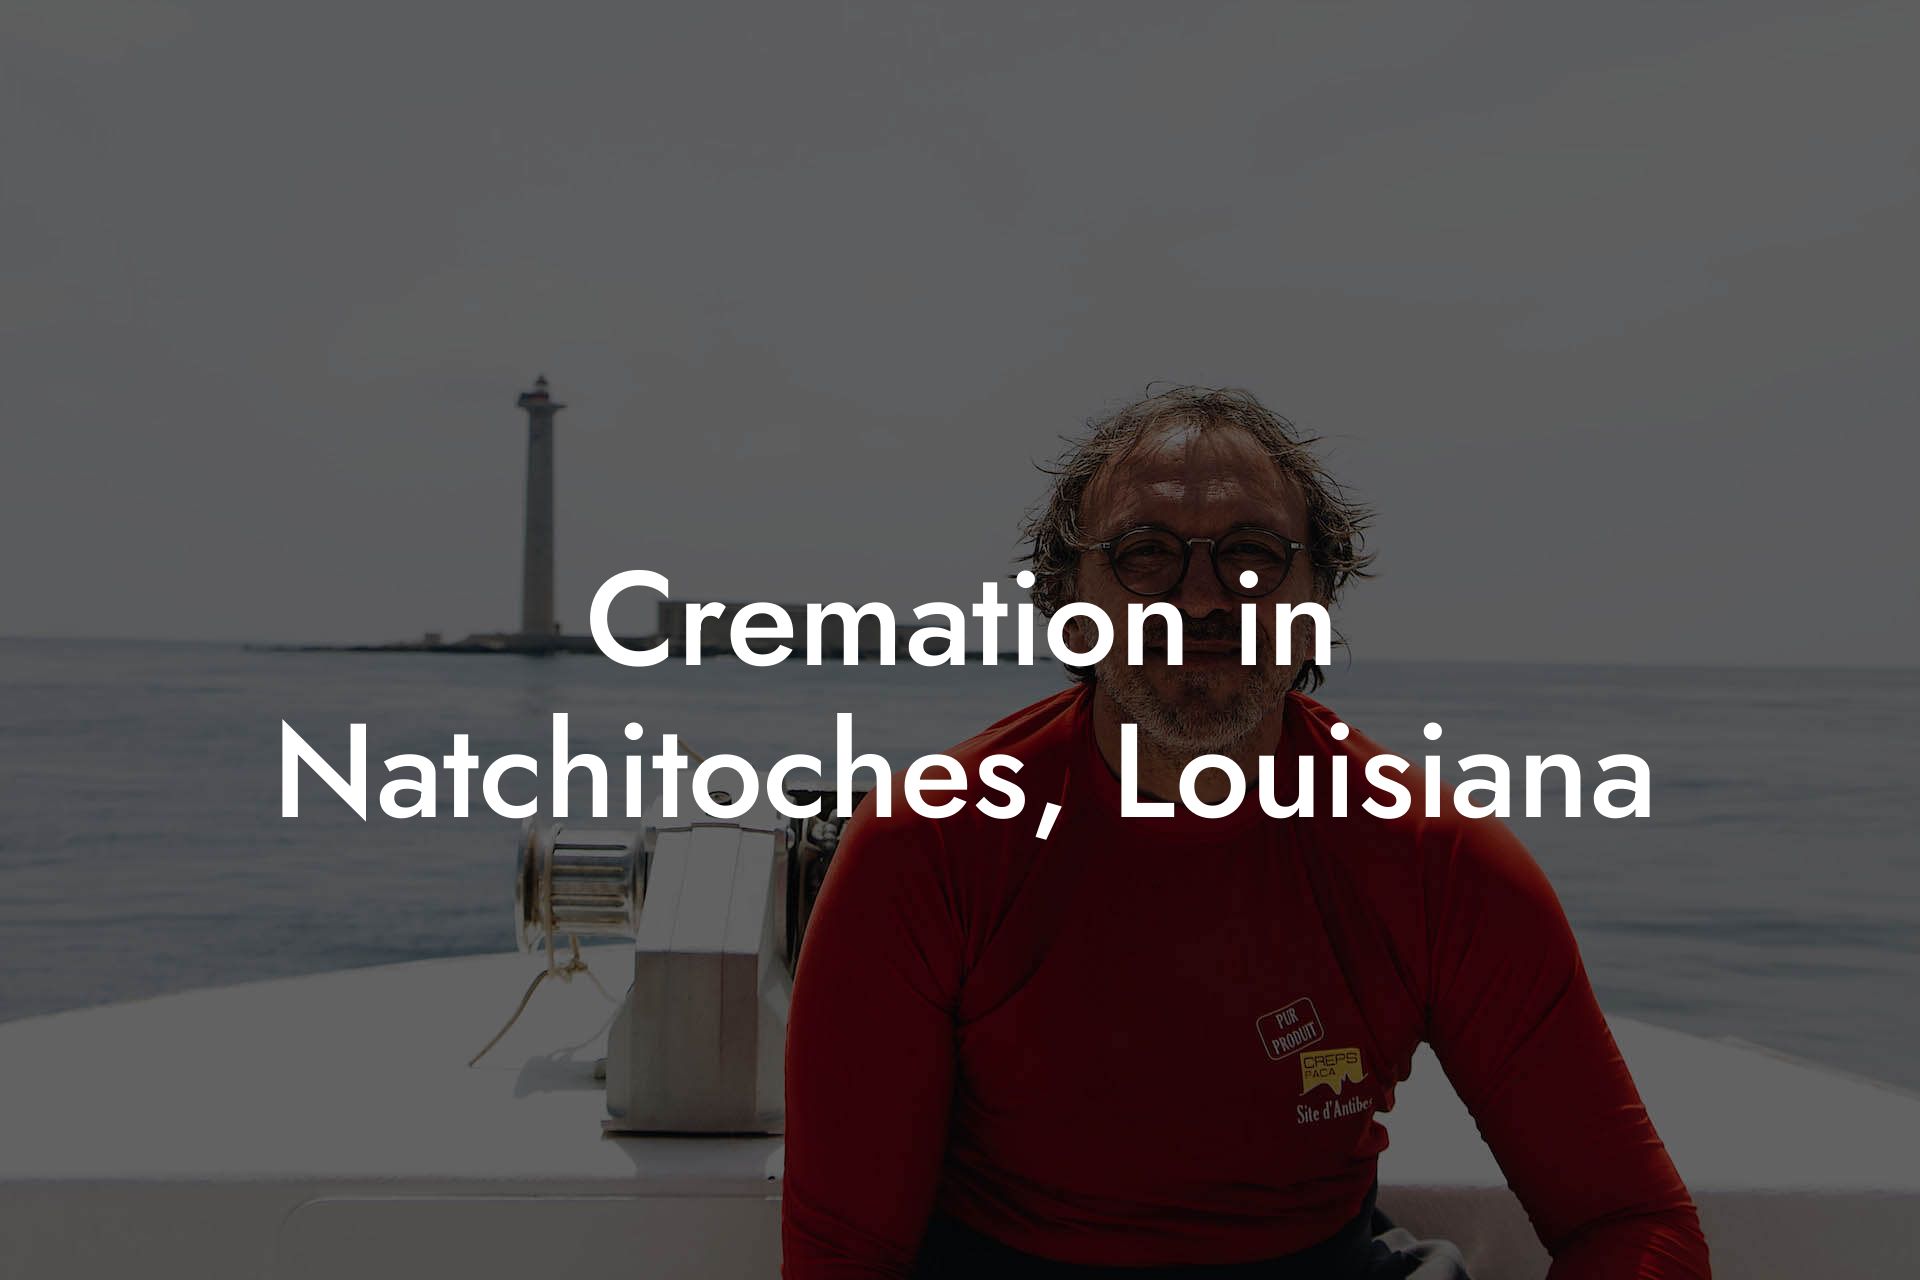 Cremation in Natchitoches, Louisiana